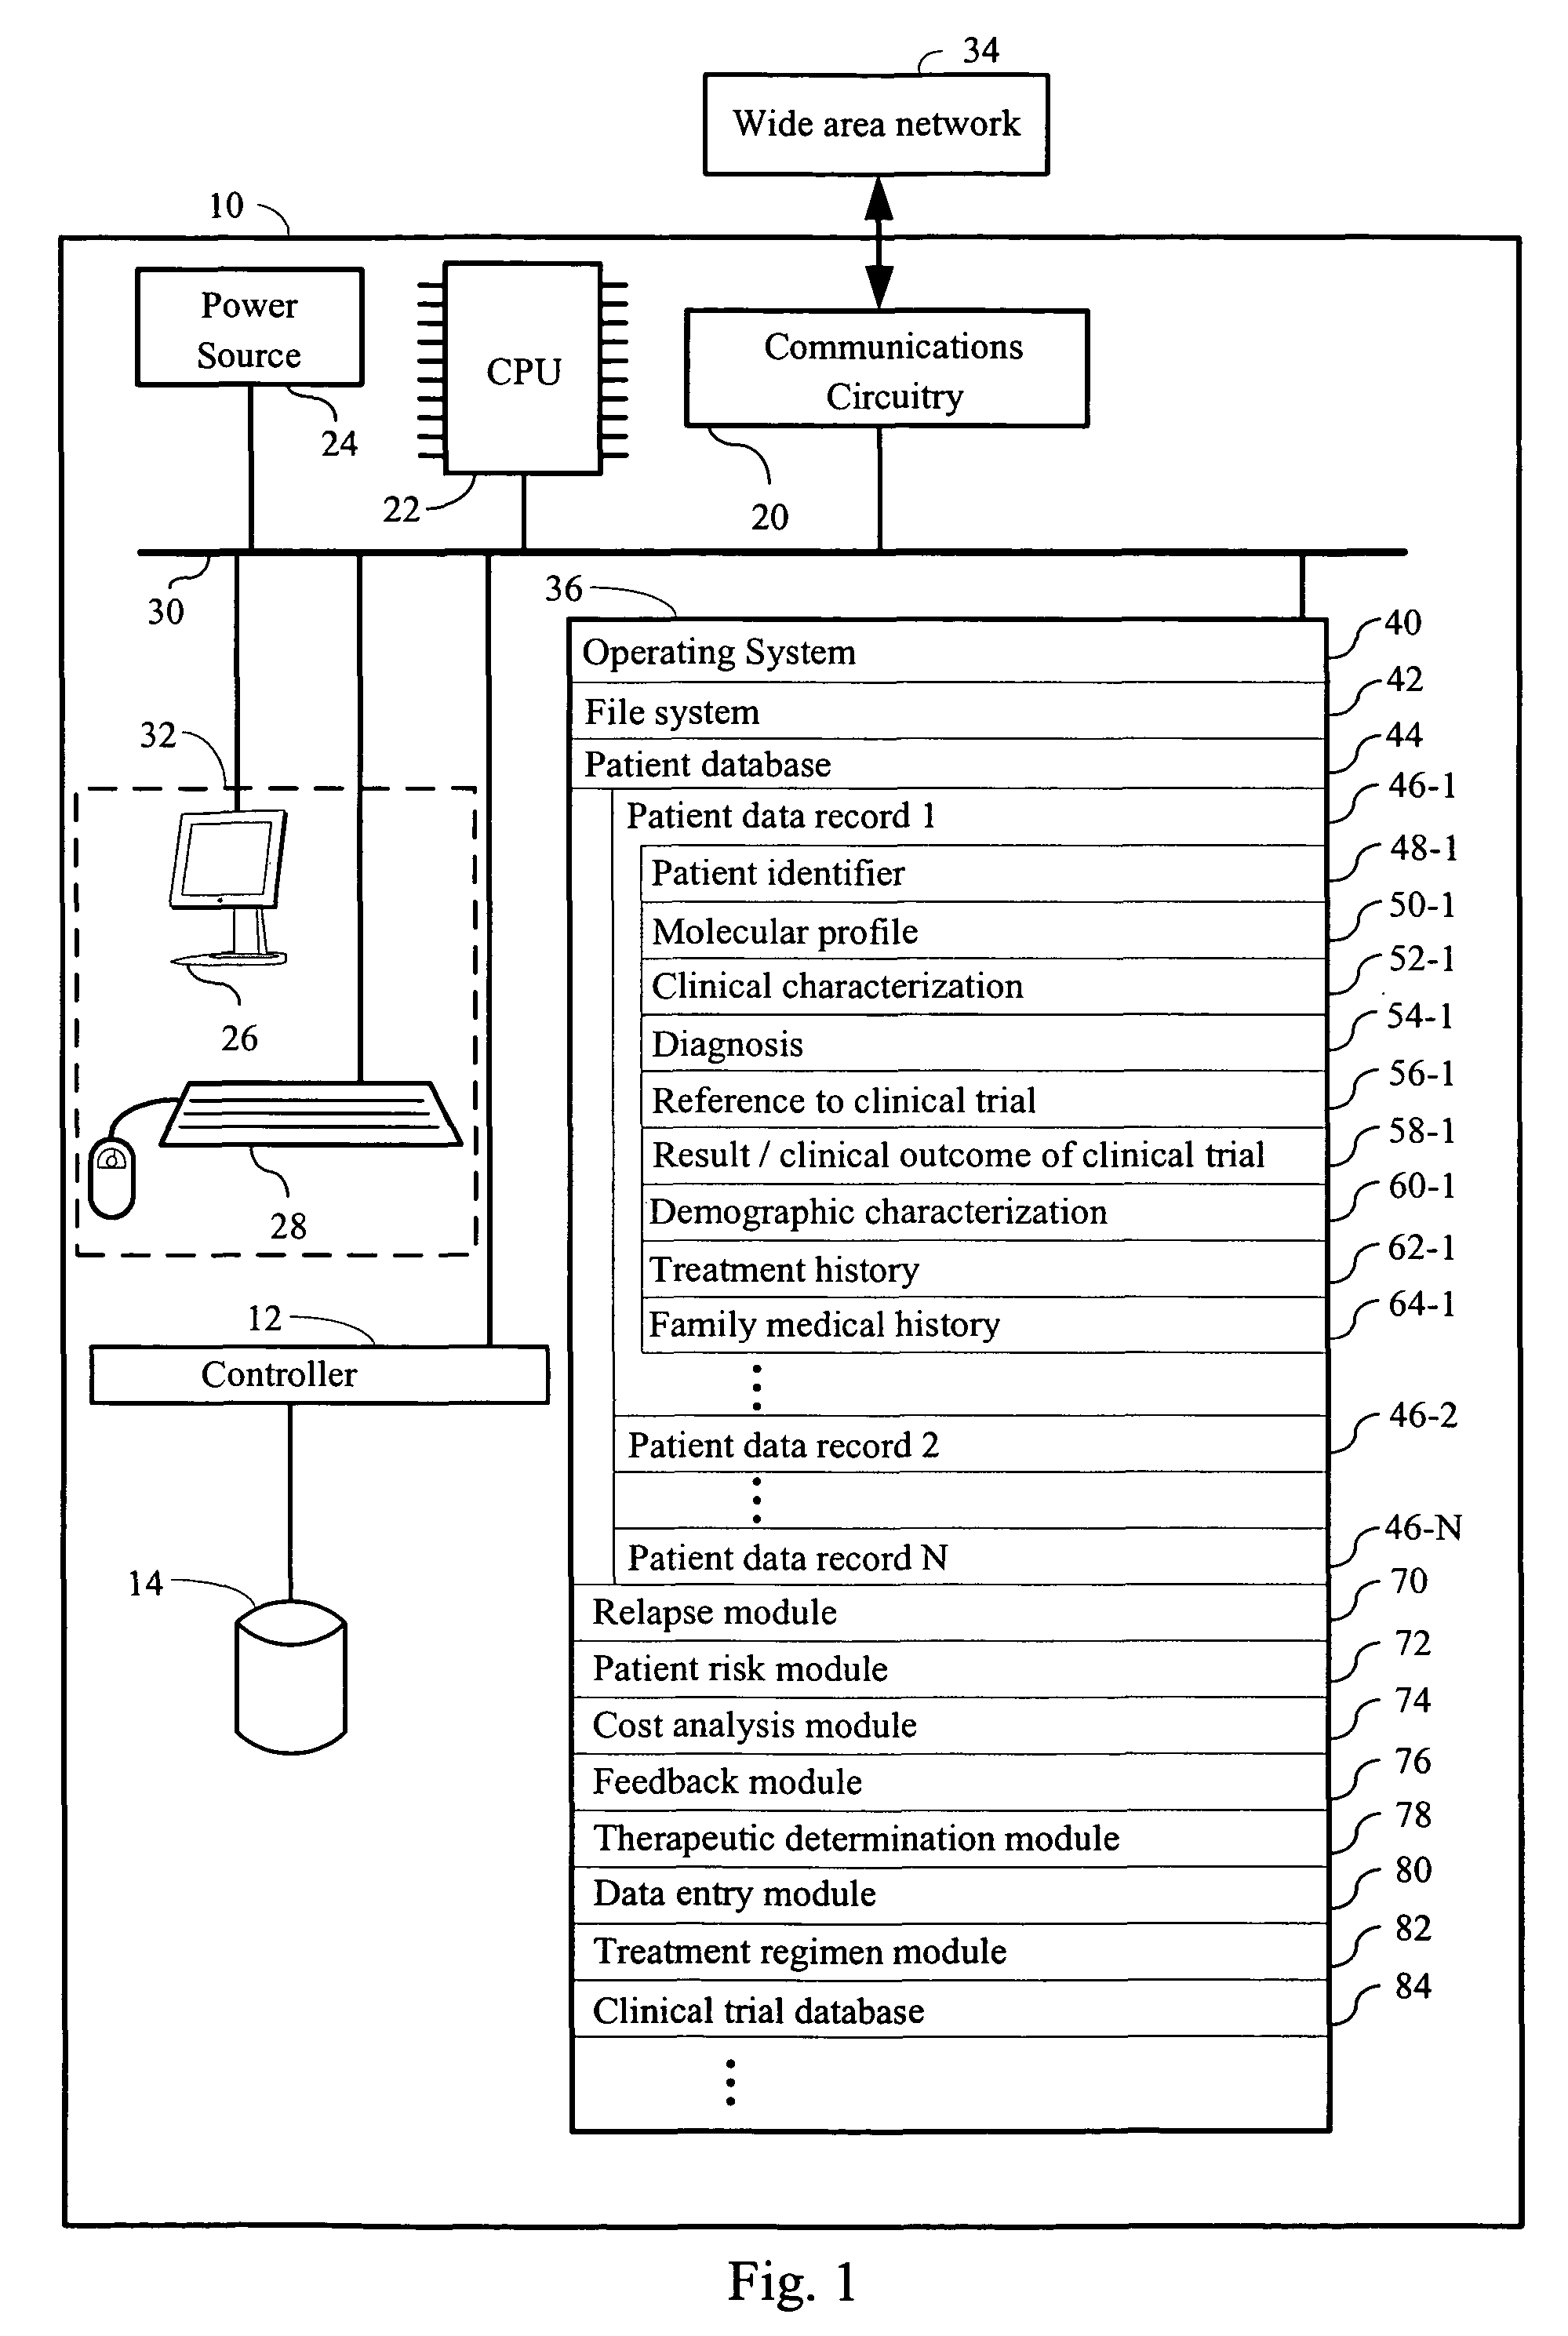 Computer systems and methods for providing health care